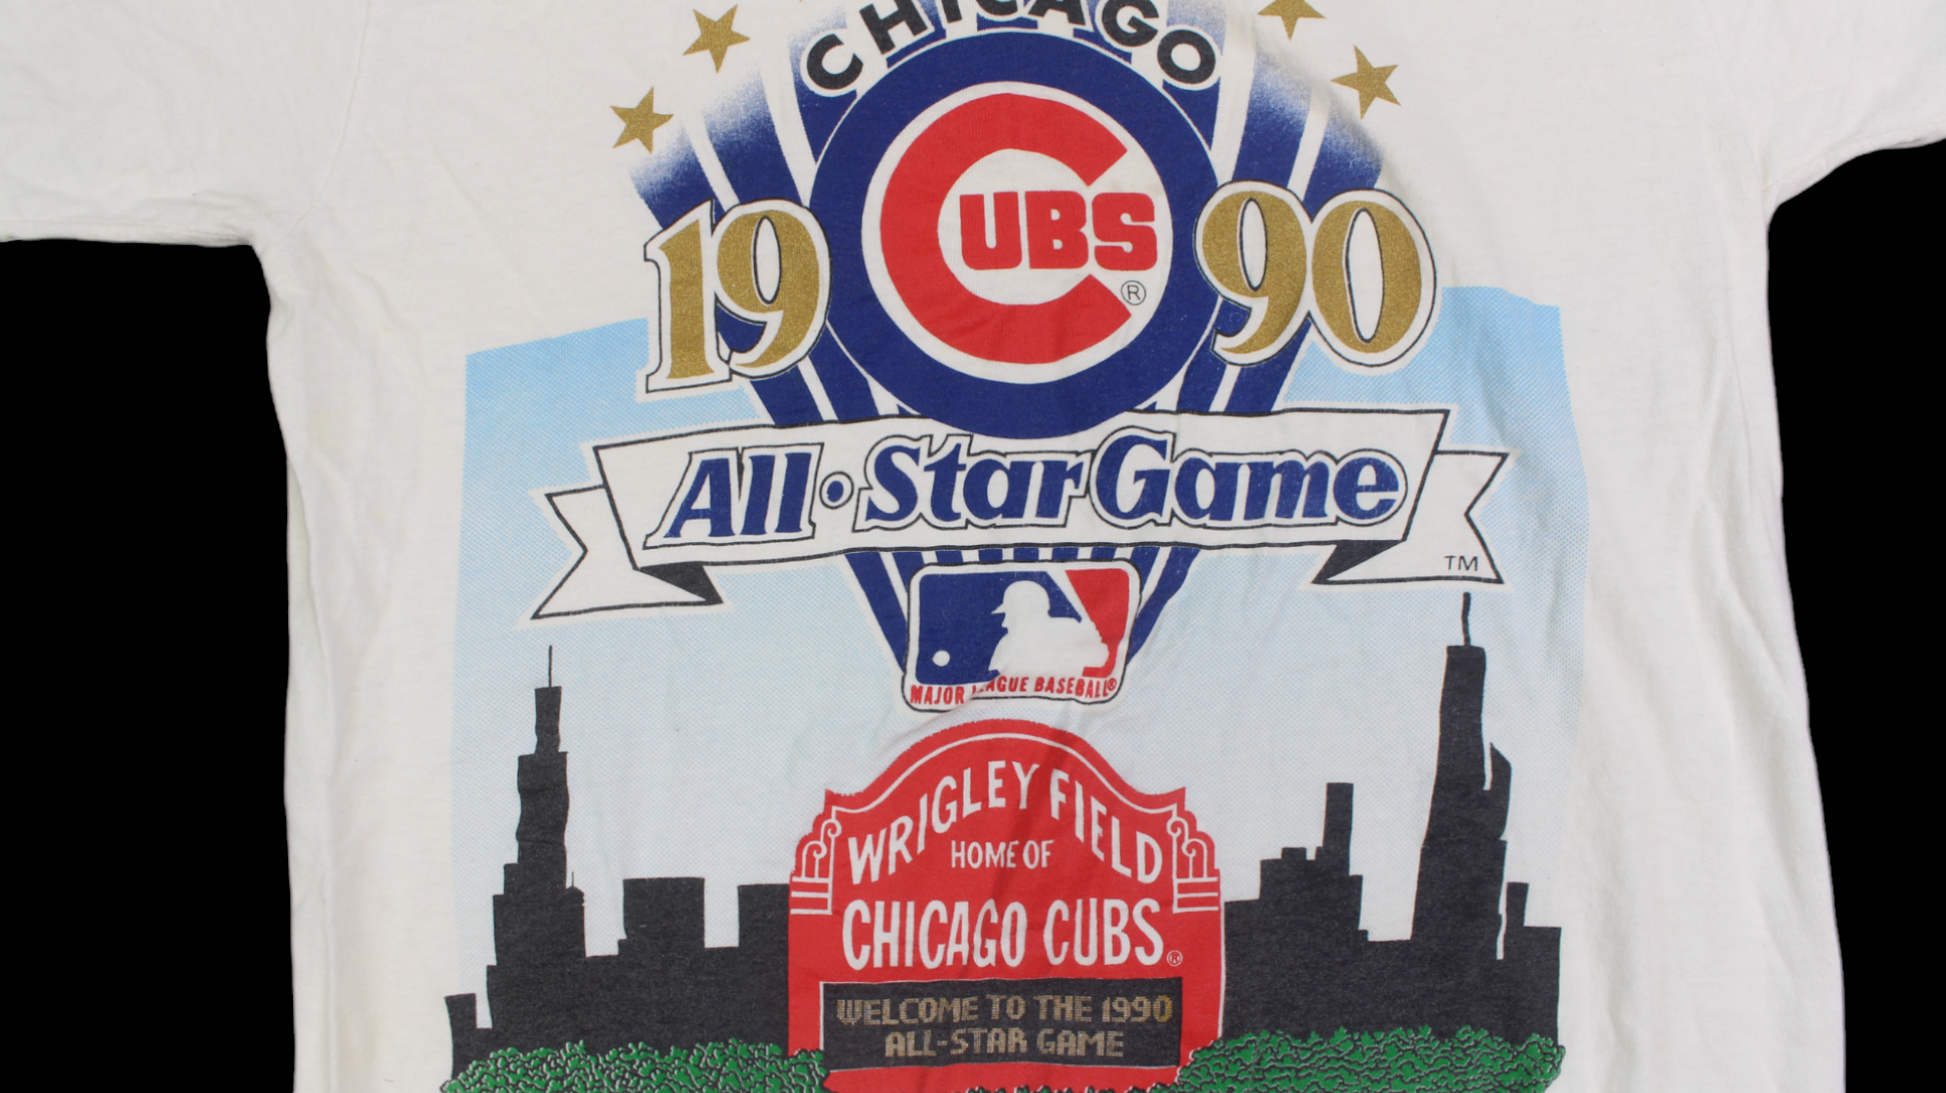 1990 Chicago Cubs All-Star Game shirt